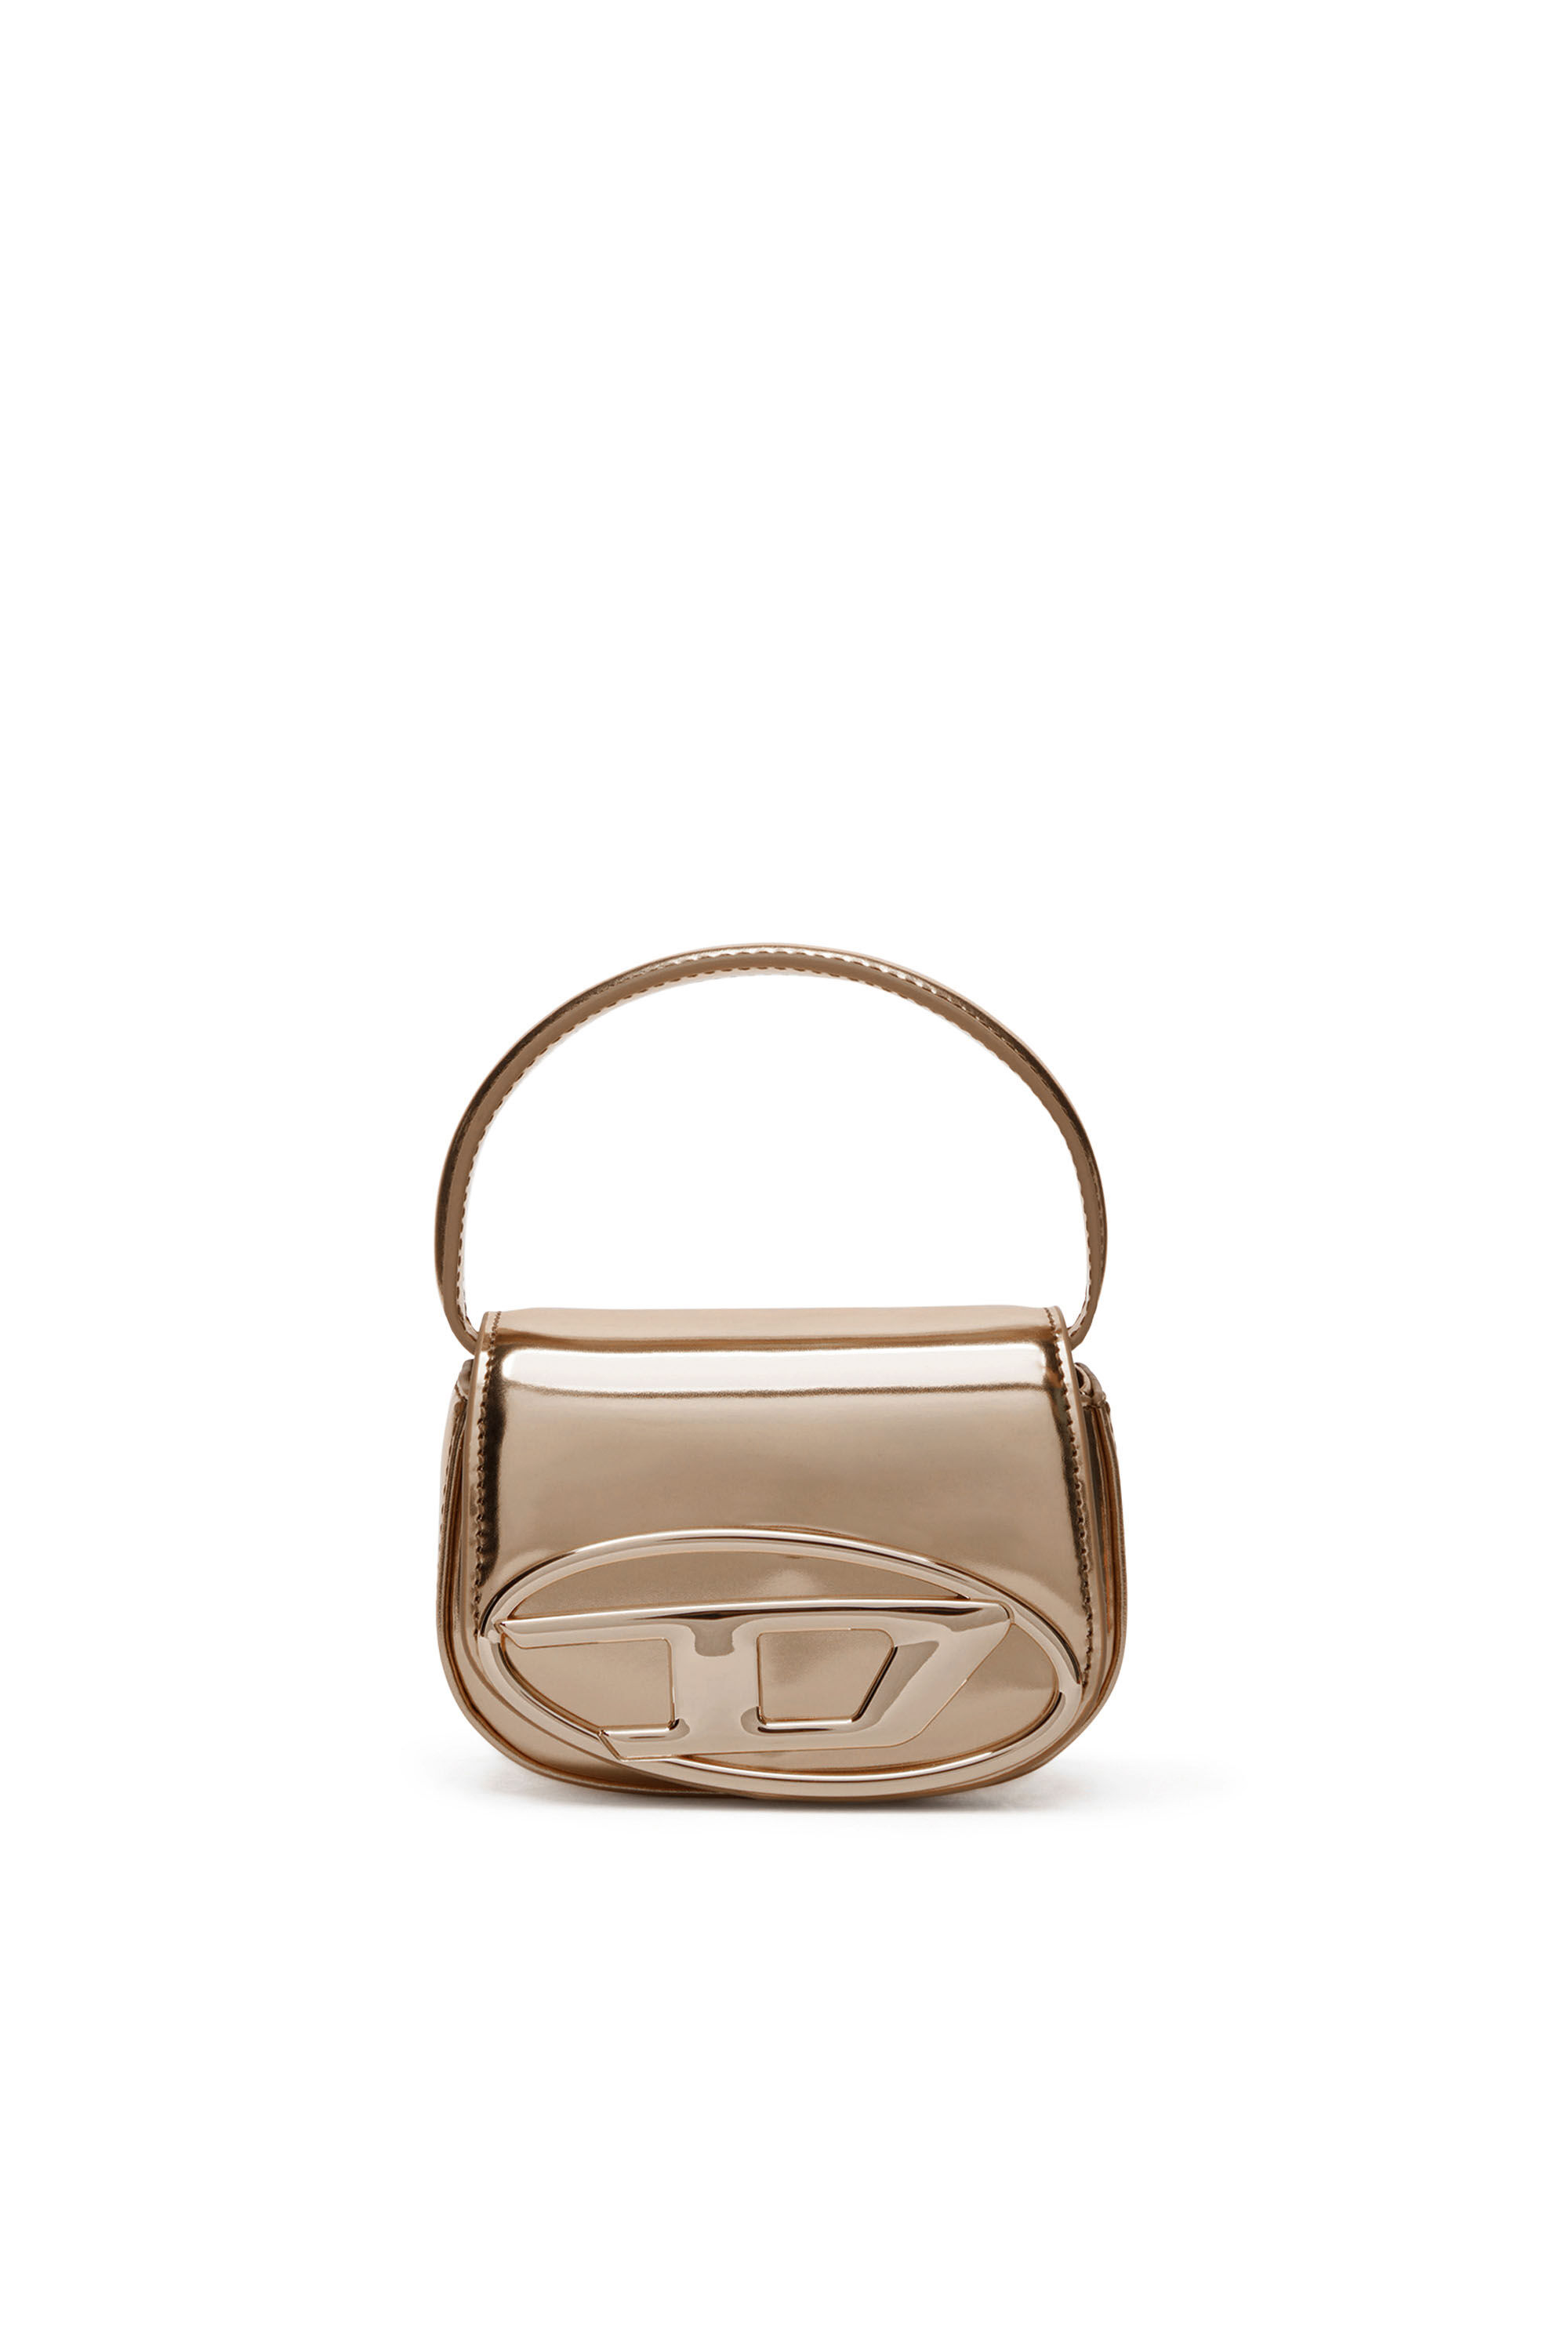 Diesel - 1DR-XS-S, Woman 1DR-XS-S-Iconic mini bag in mirrored leather in Brown - Image 1